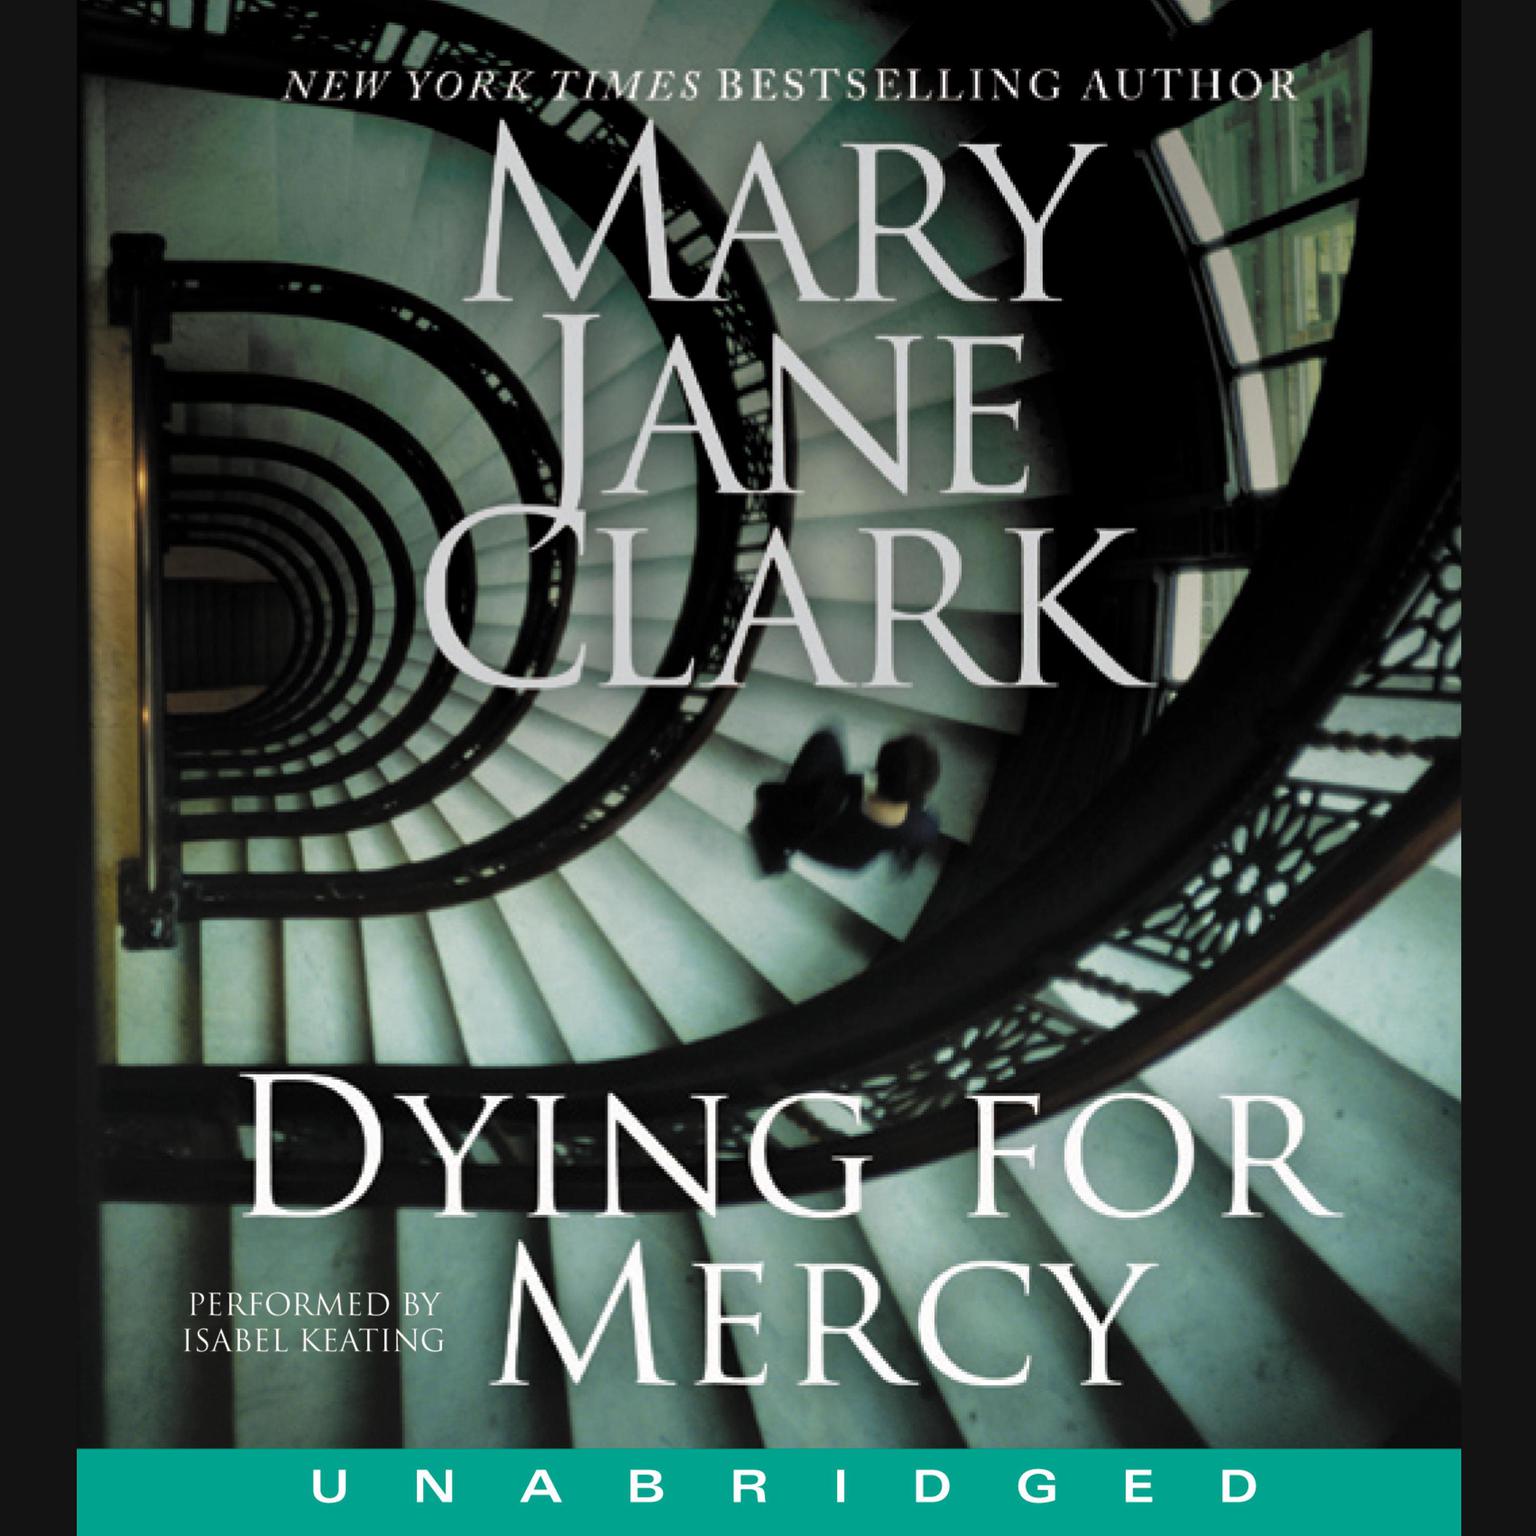 Dying for Mercy Audiobook, by Mary Jane Clark